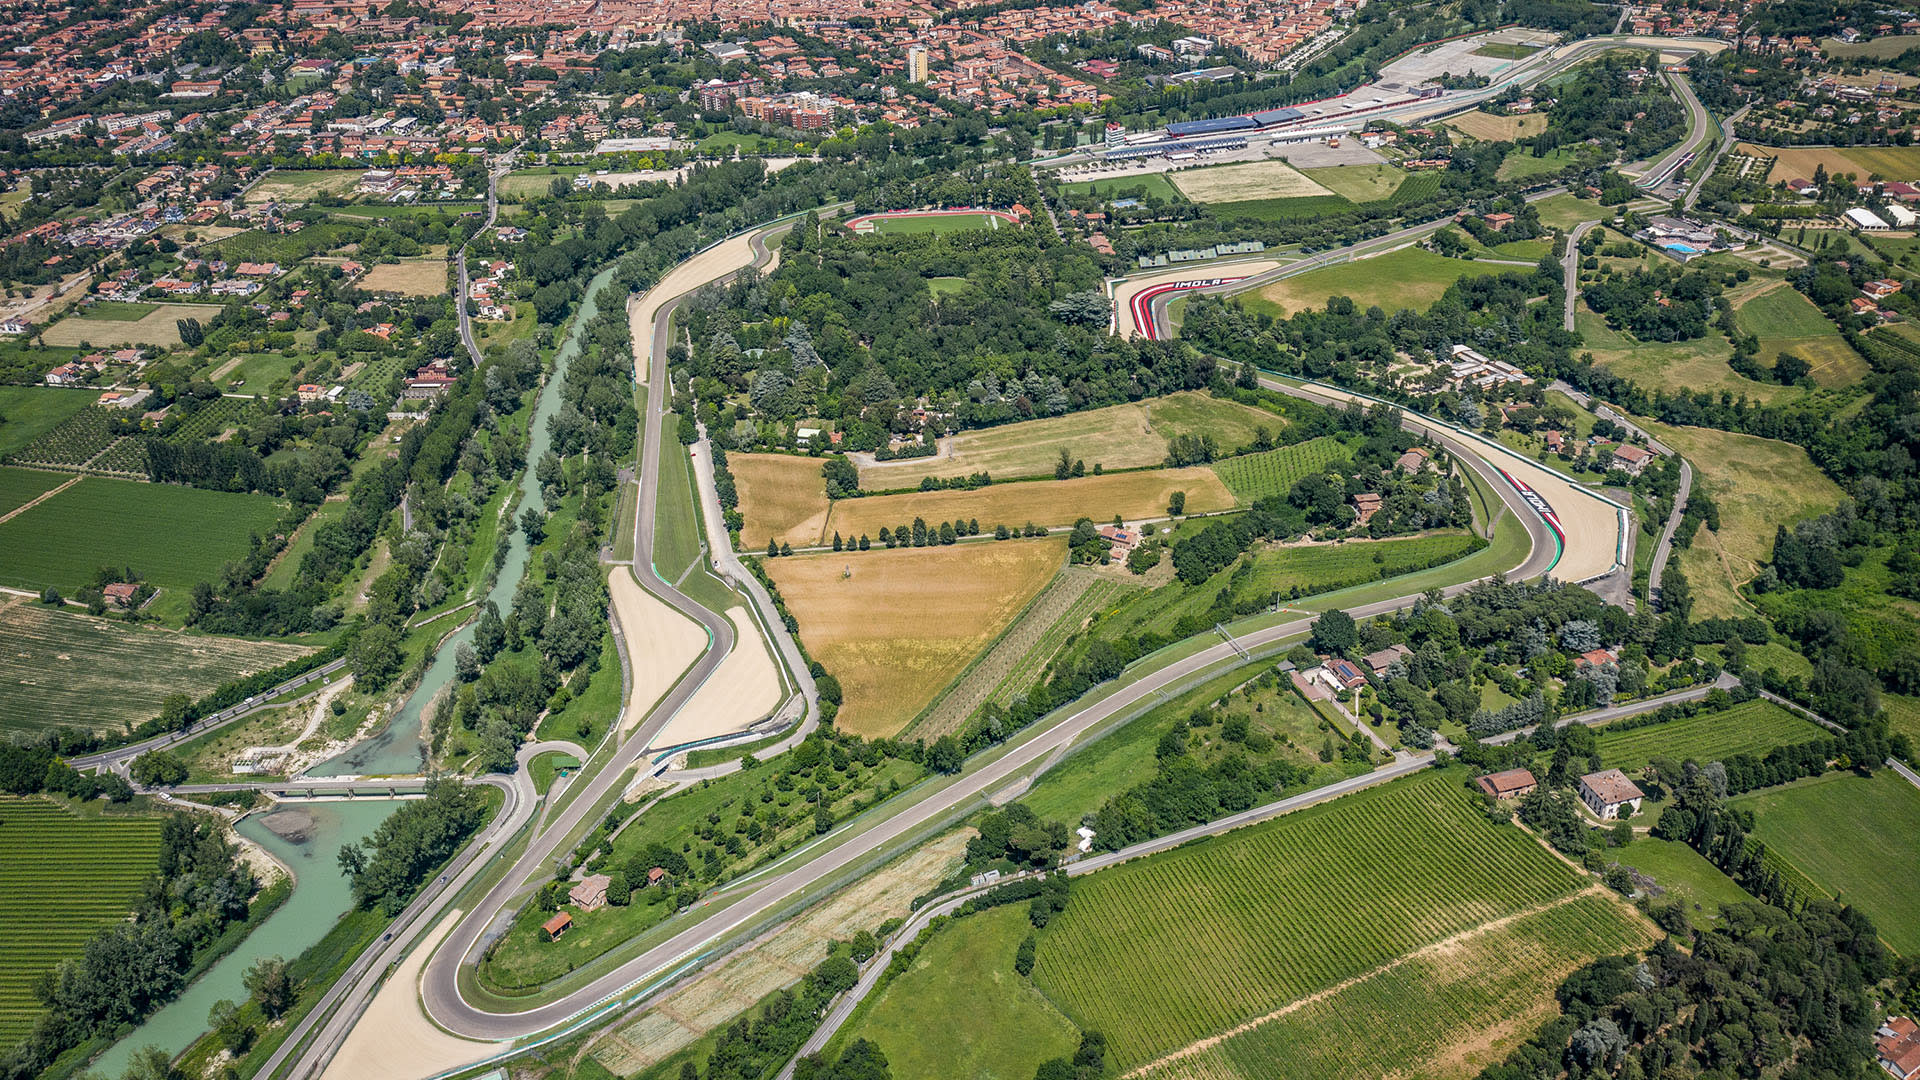 Imola Circuit Guide Everything you need to know about the Italian circuit Formula 1®